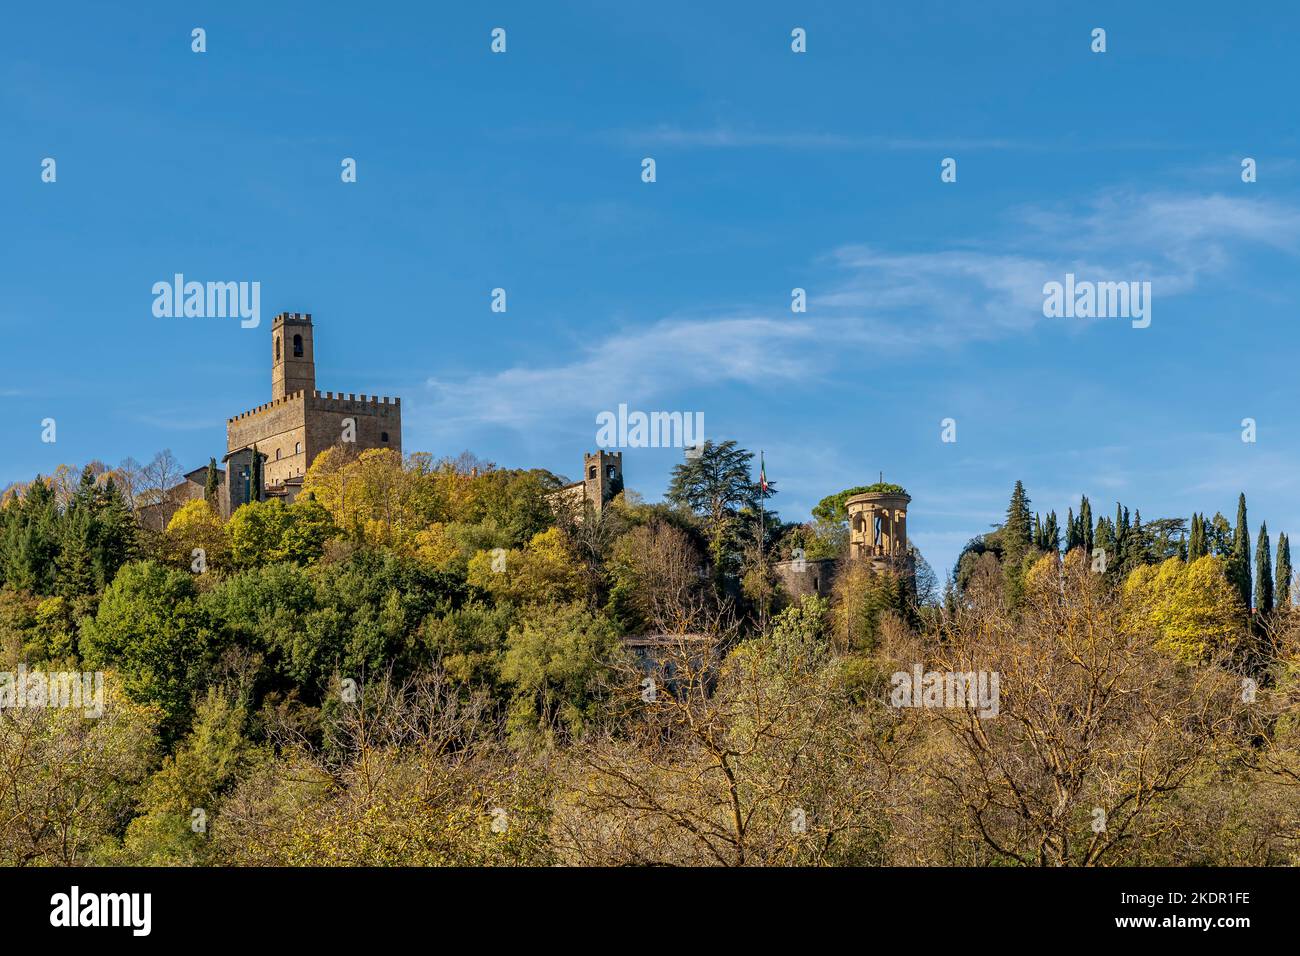 View of Poppi, Arezzo, Italy, with autumn colored vegetation Stock Photo